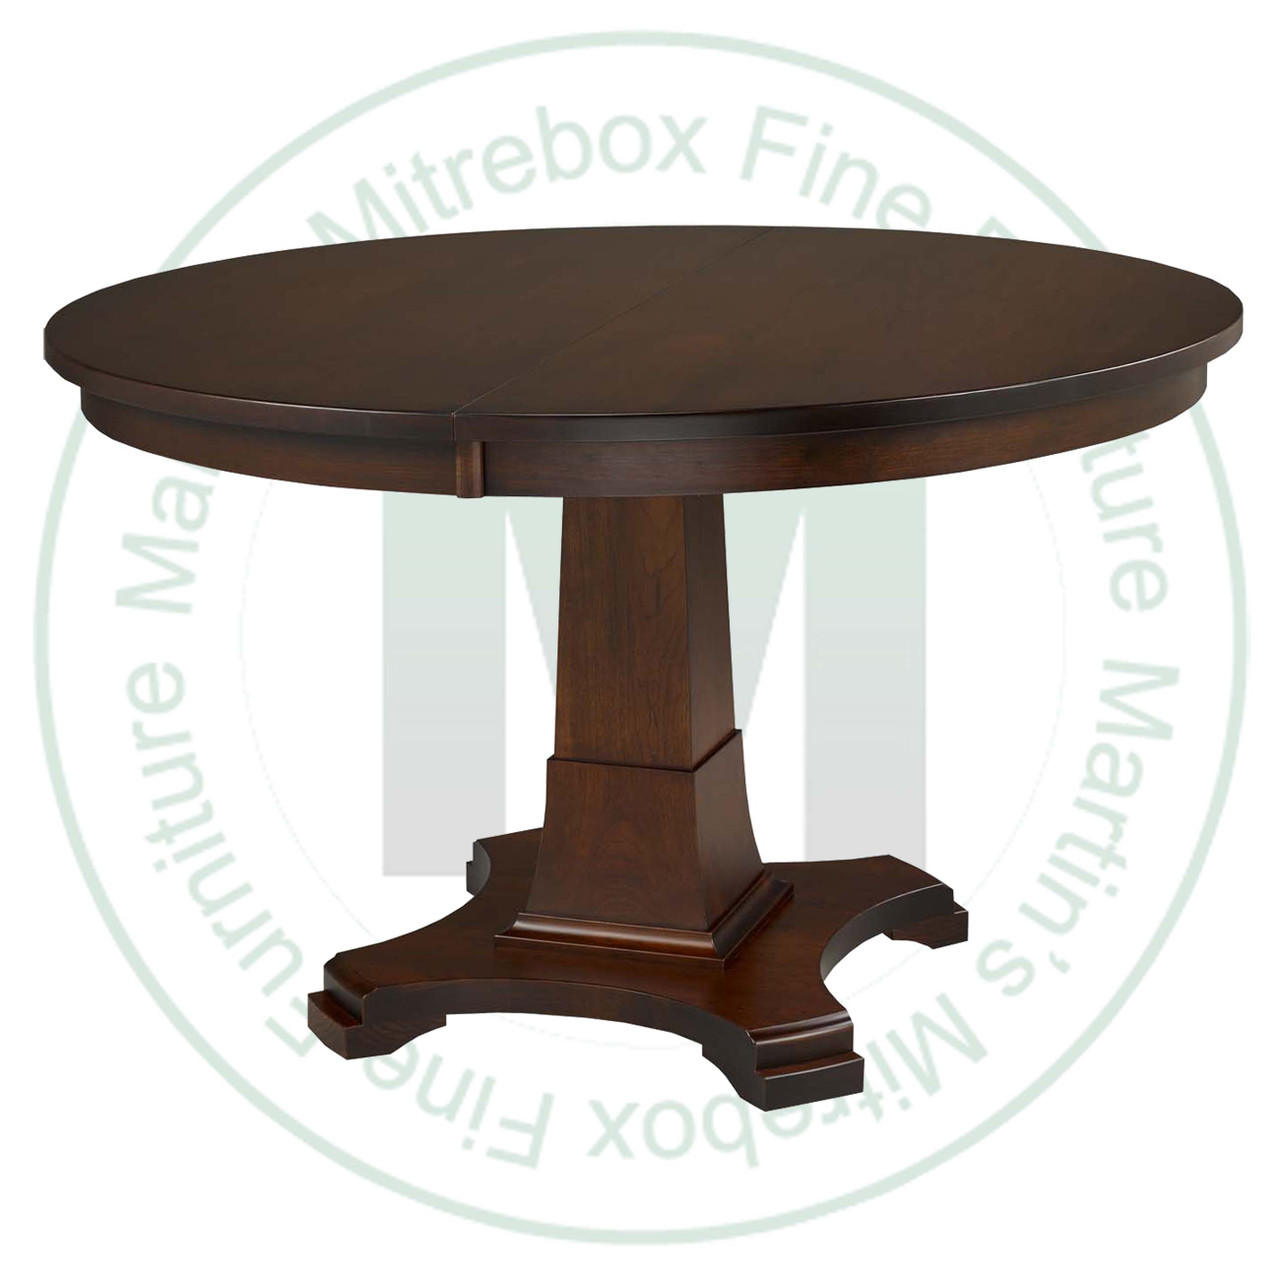 Wormy Maple Abbey Single Pedestal Table 42''D x 48''W x 30''H  Round Solid Table. Table Has 1'' Thick Top